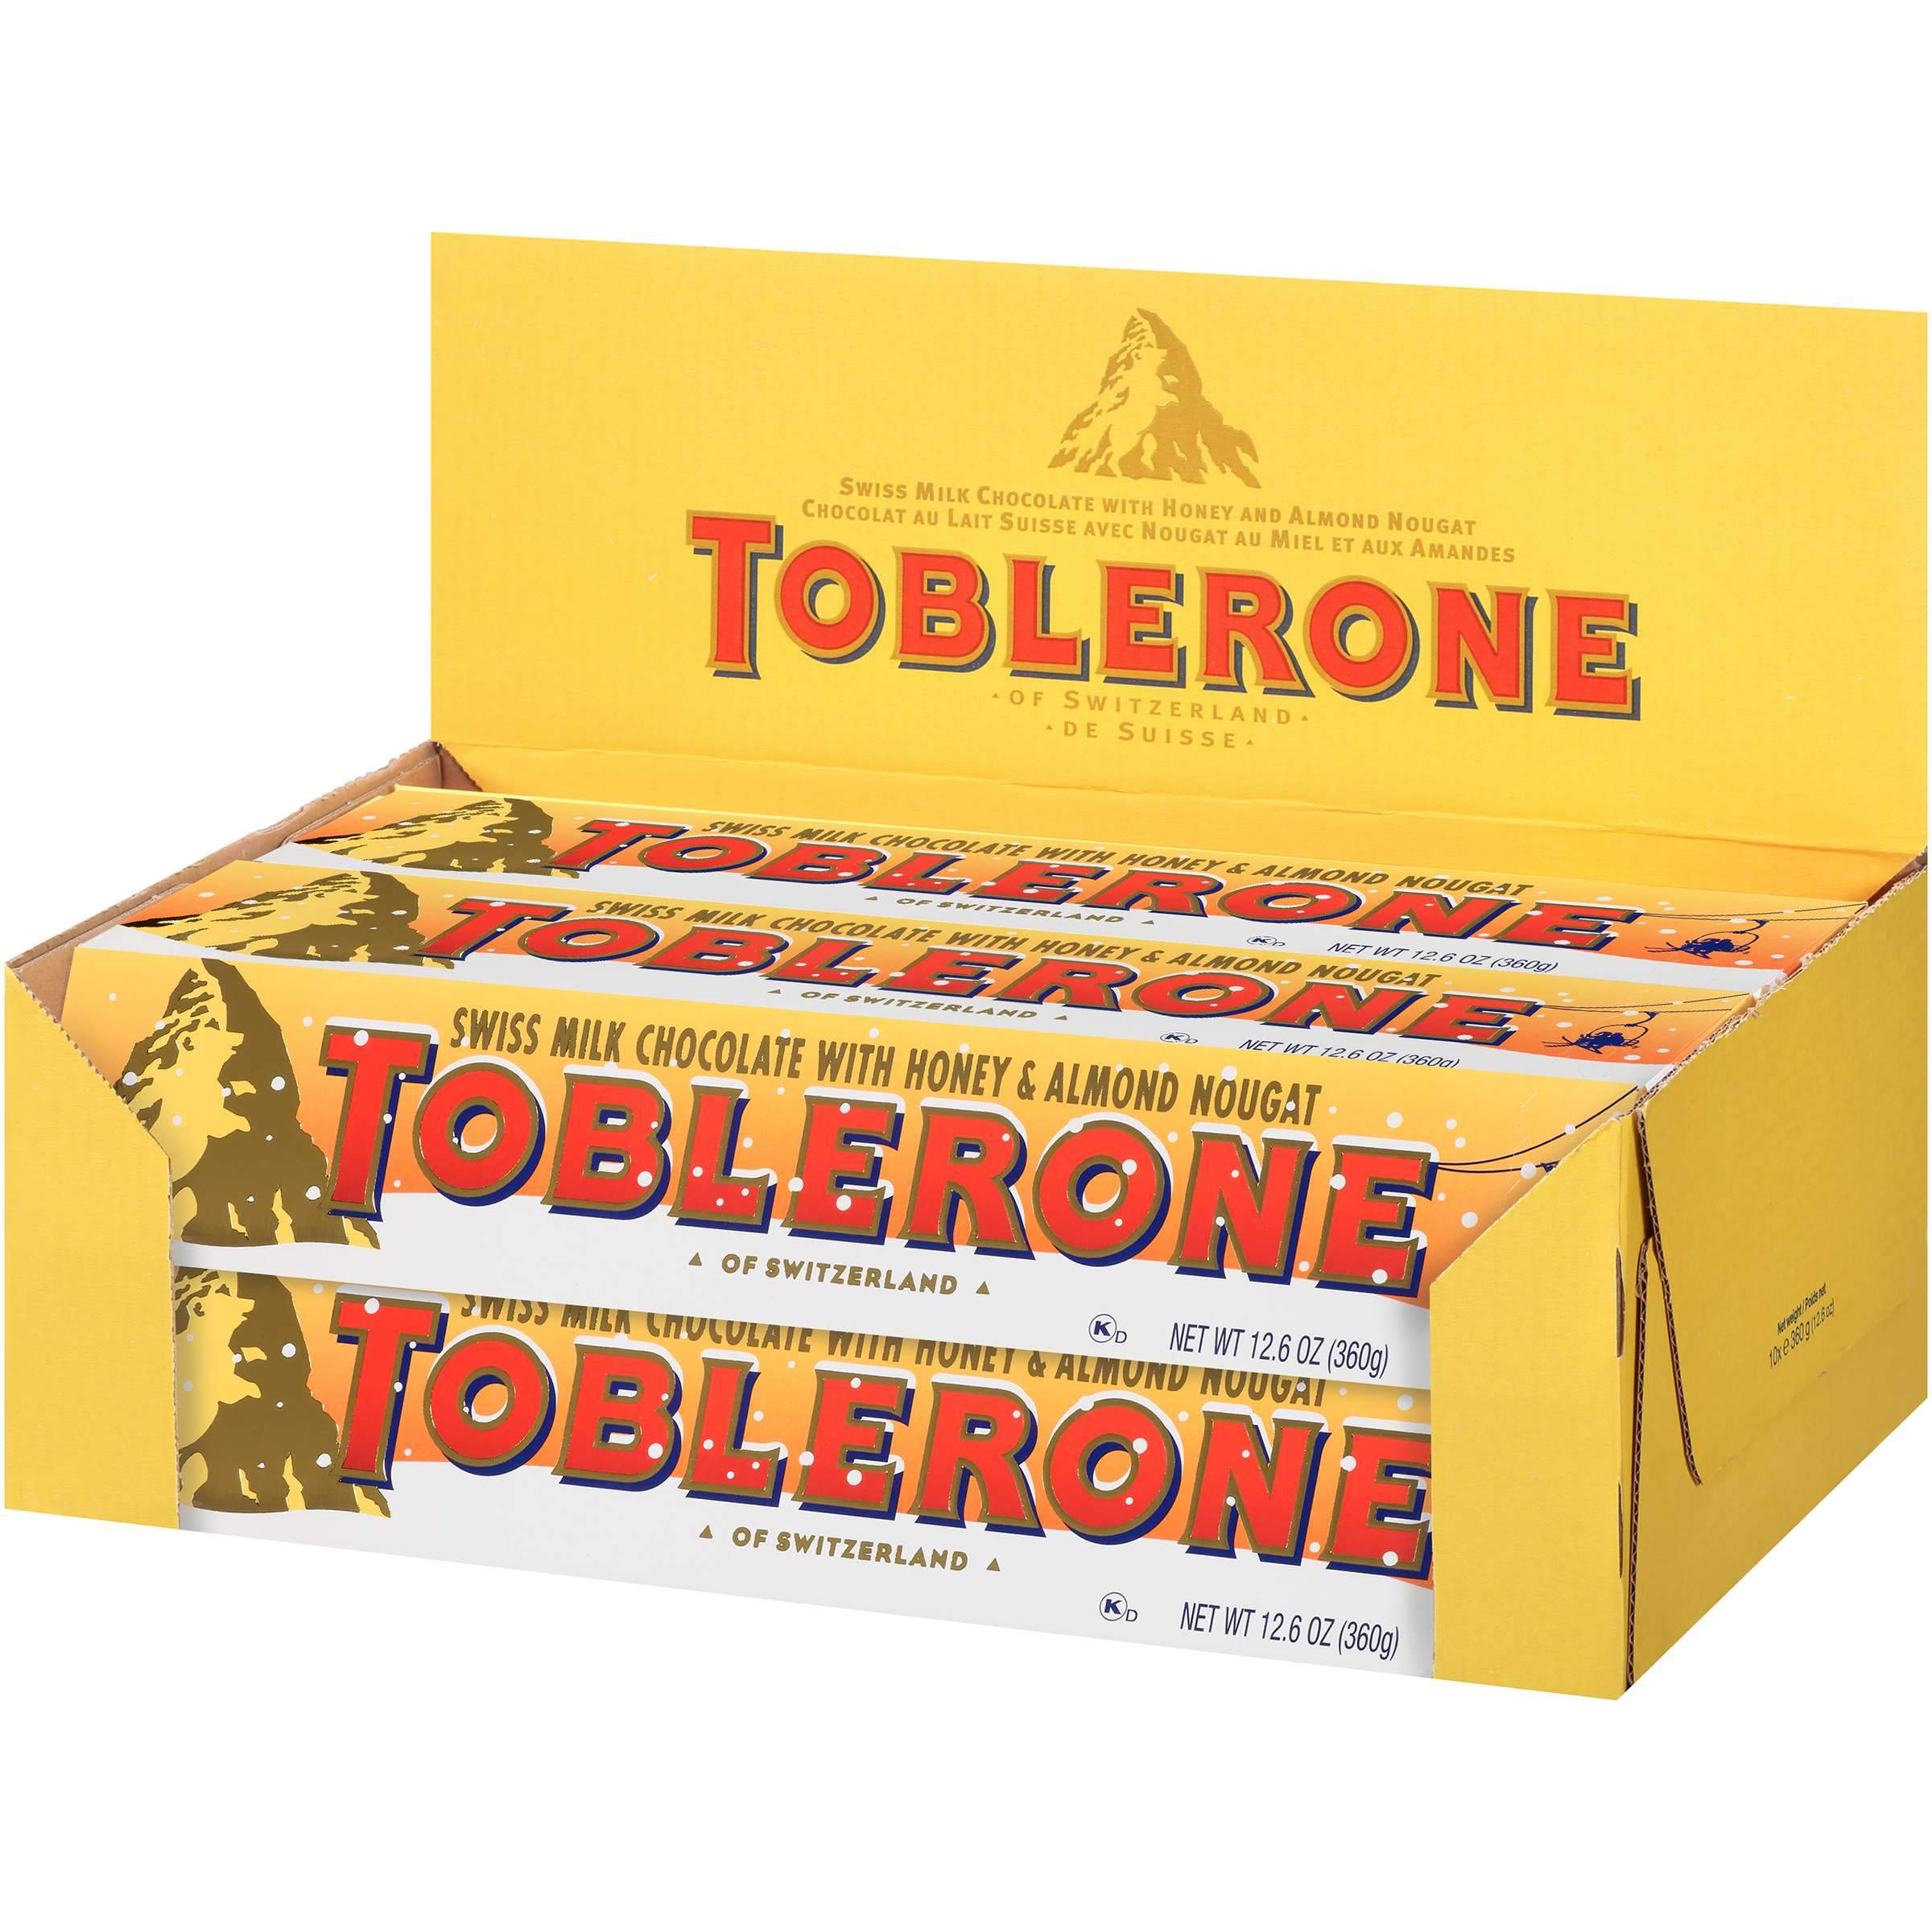 Toblerone Swiss Chocolate with Honey & Almond Nougat Meltable Toblerone 